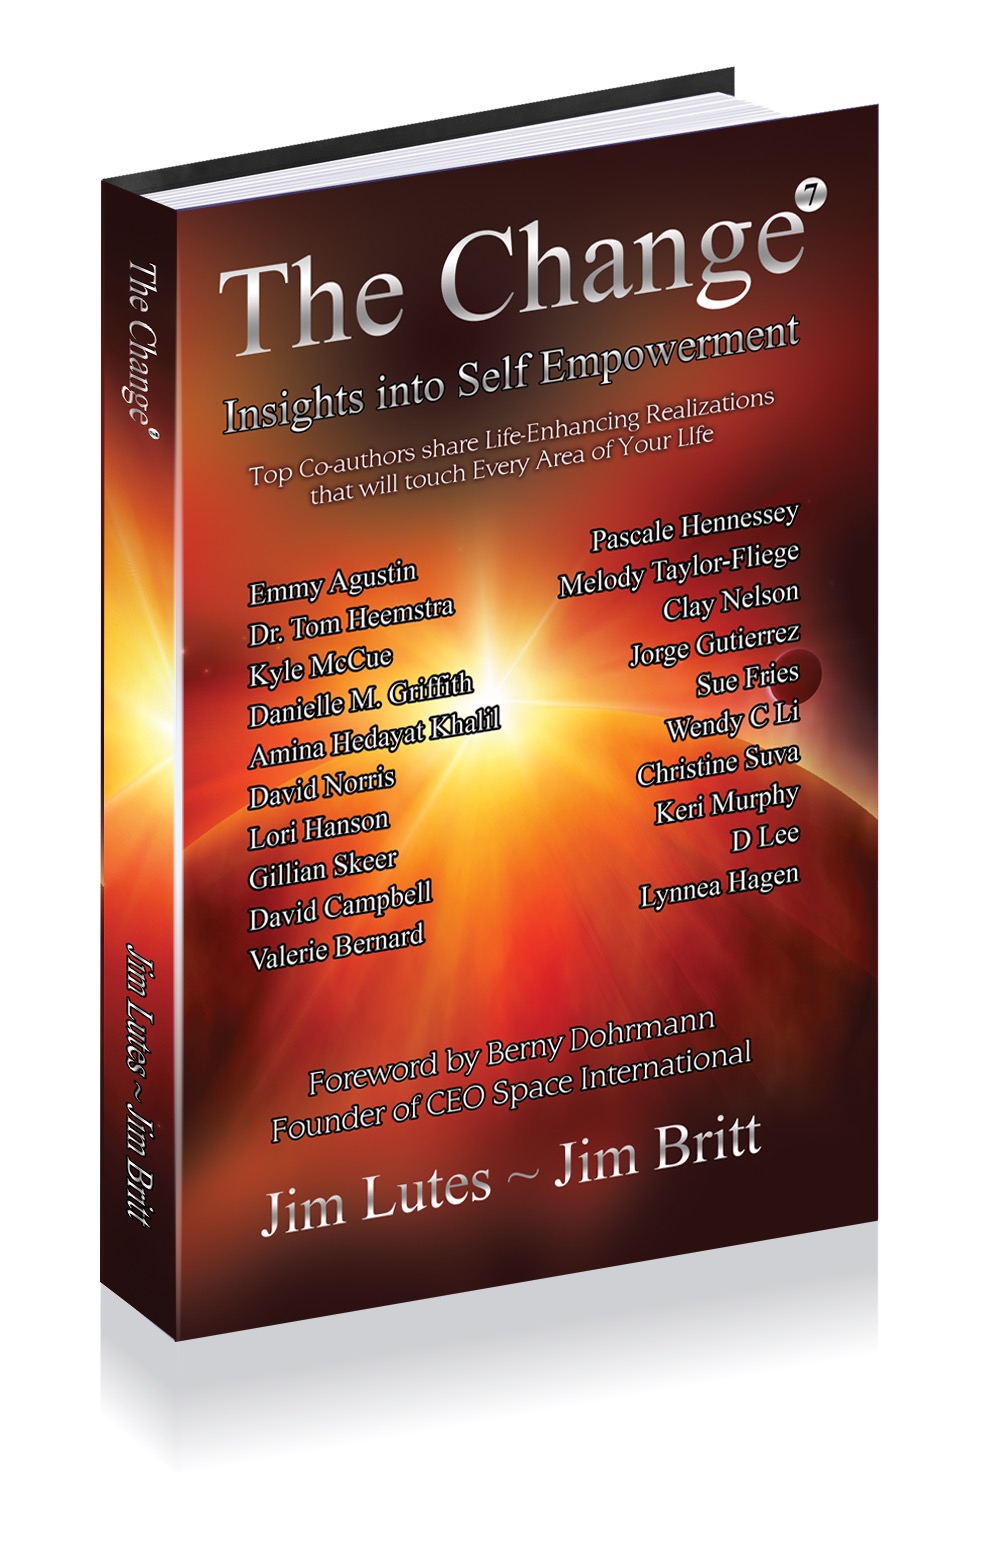 The Change book 7 3D